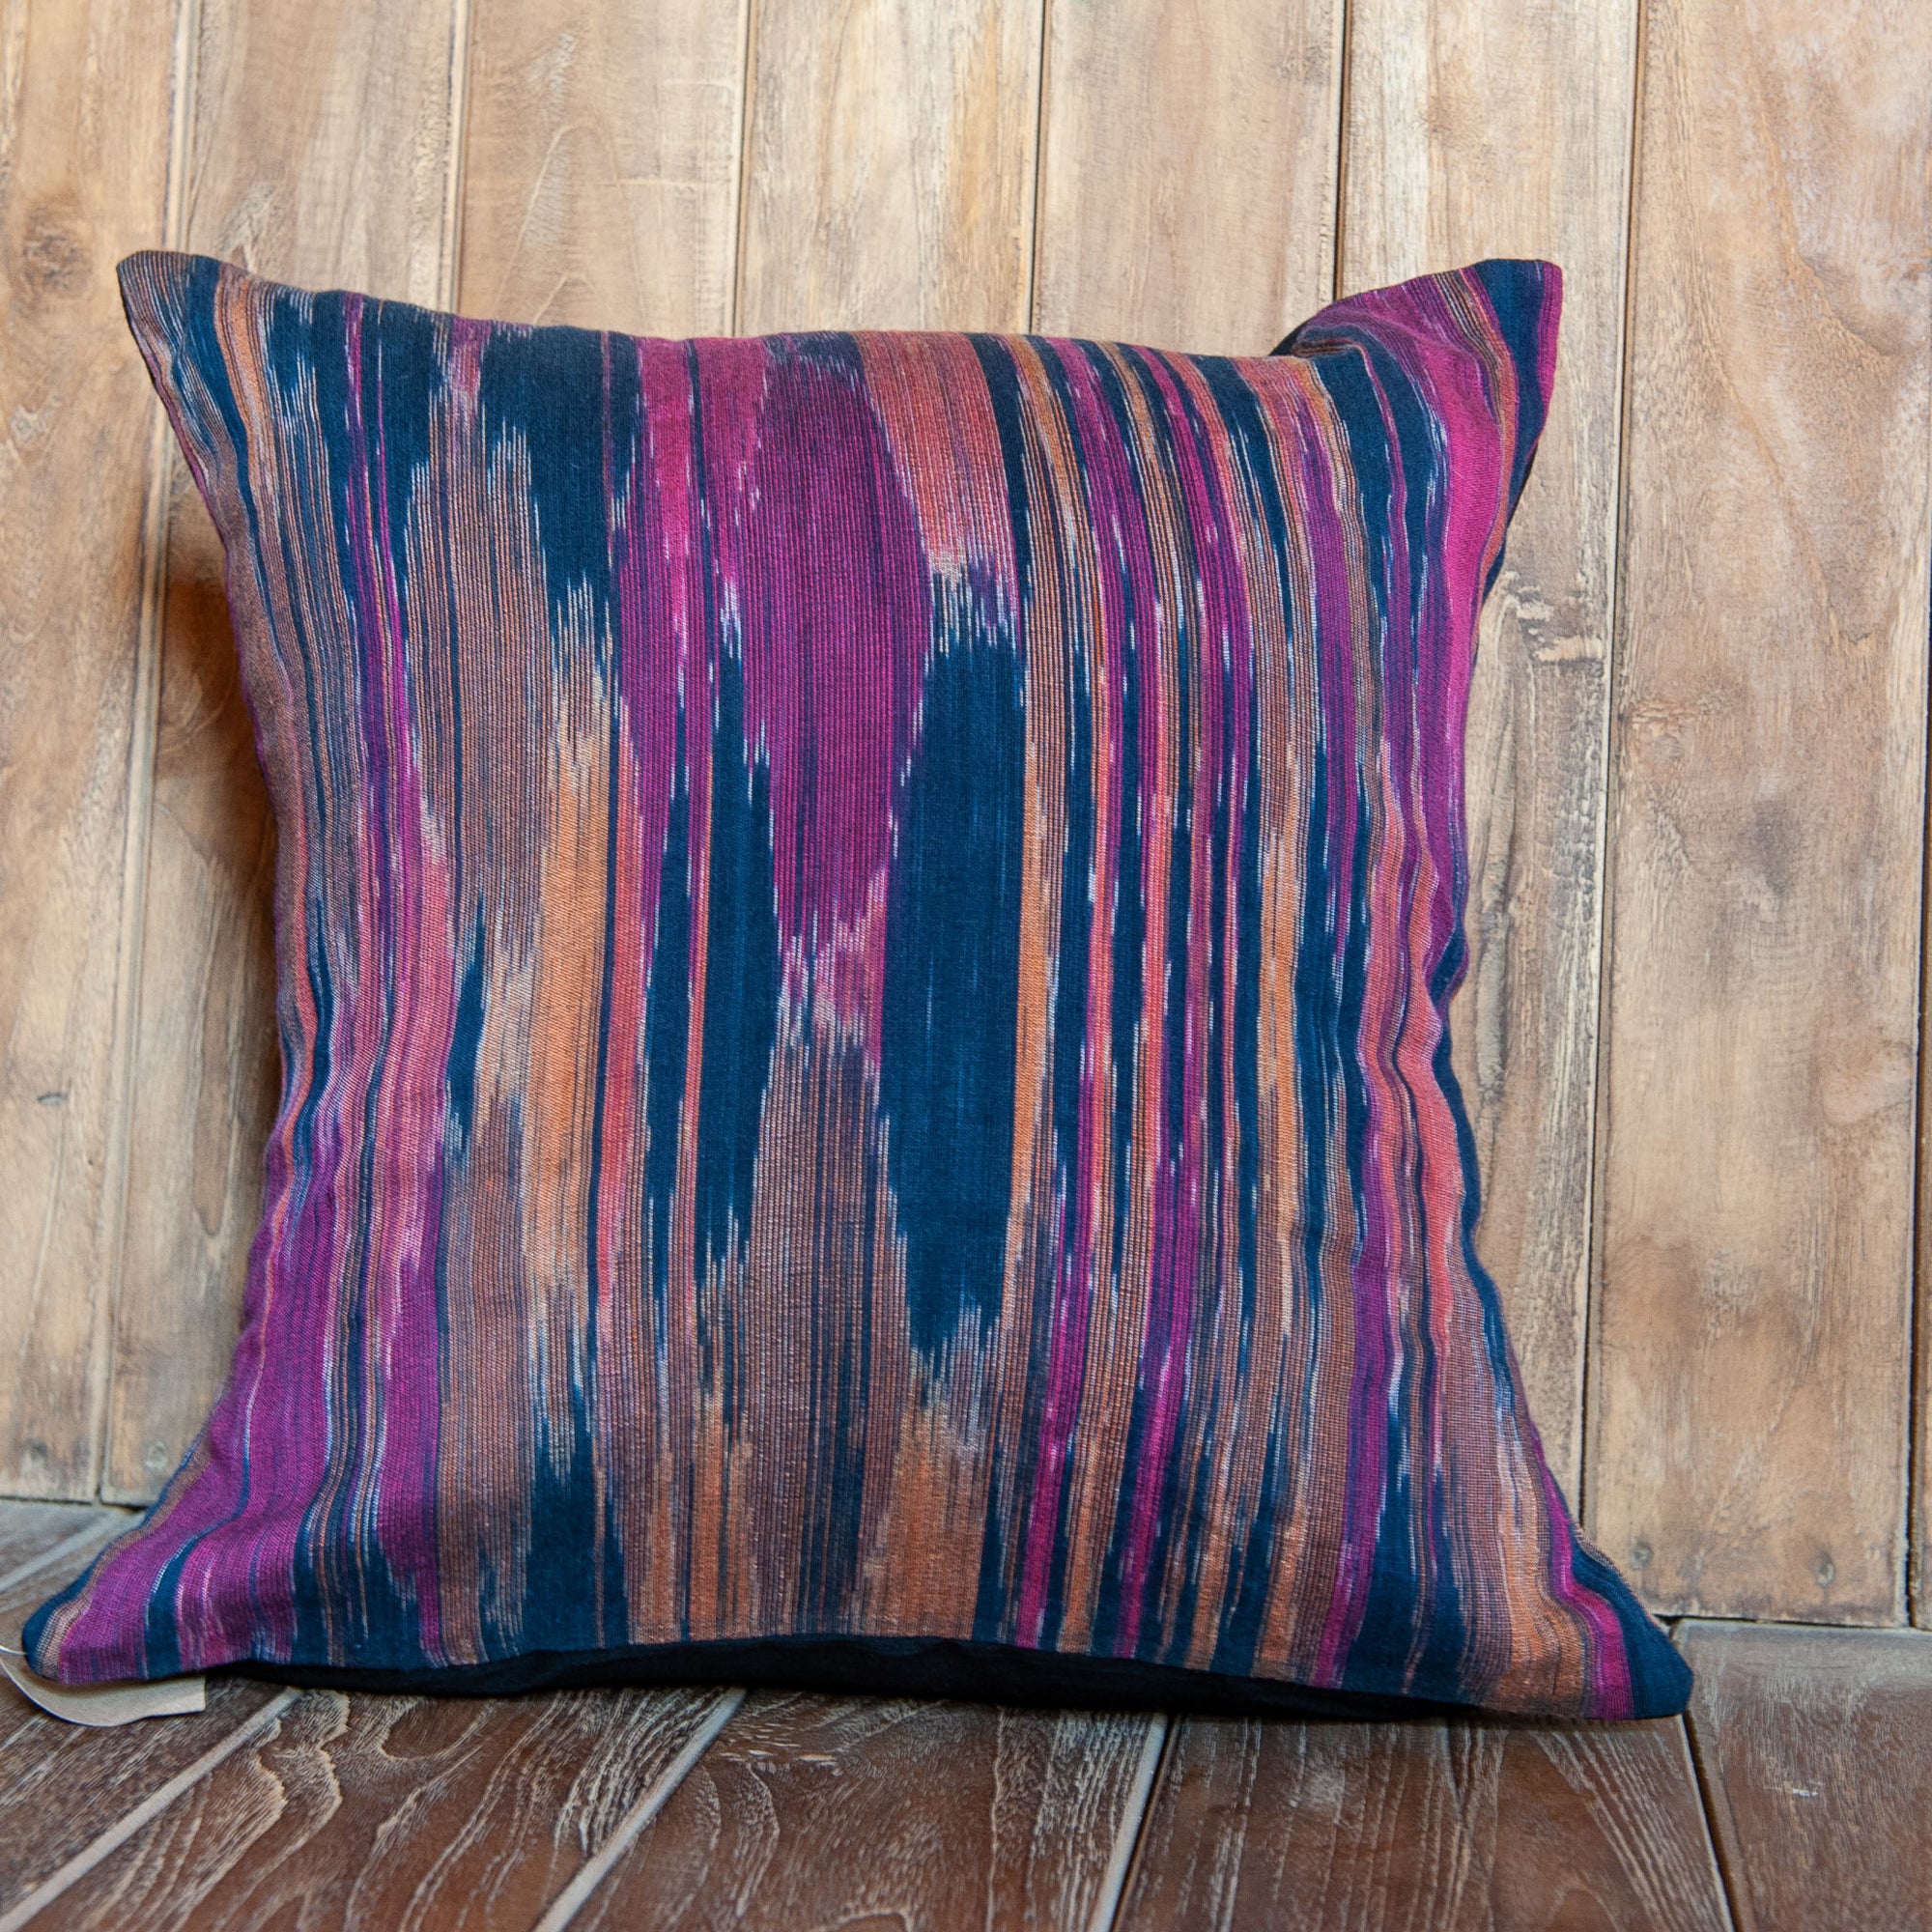 Ikat Cotton Pillow Cover - Pink and Orange Wash